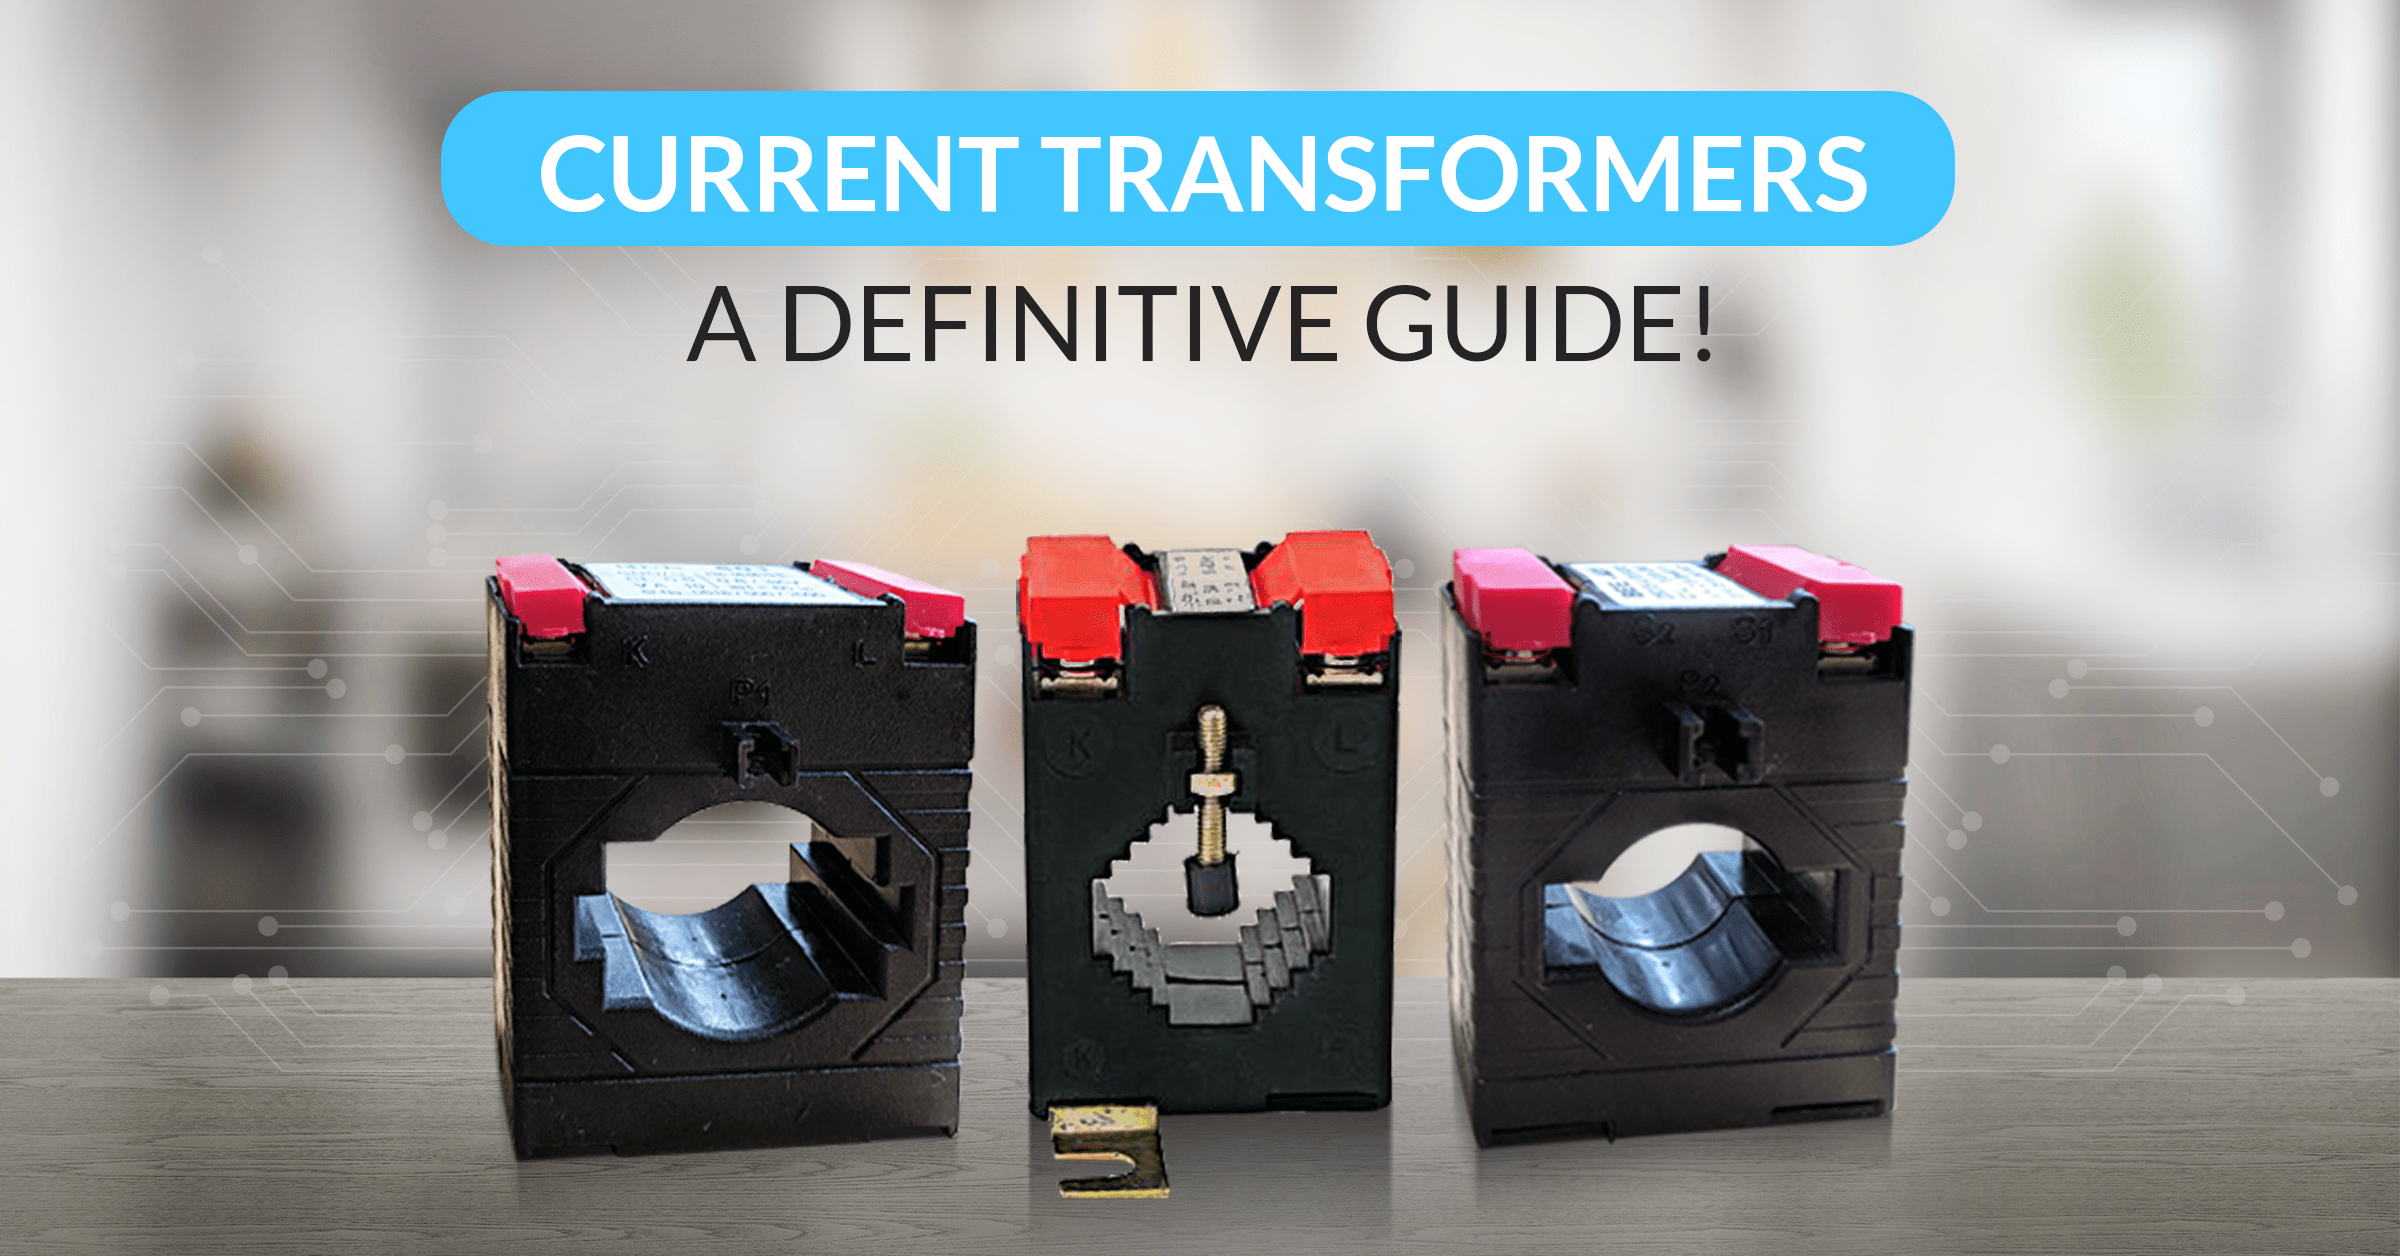 Feature image for our blog on Current Transformers - a definitive guide!